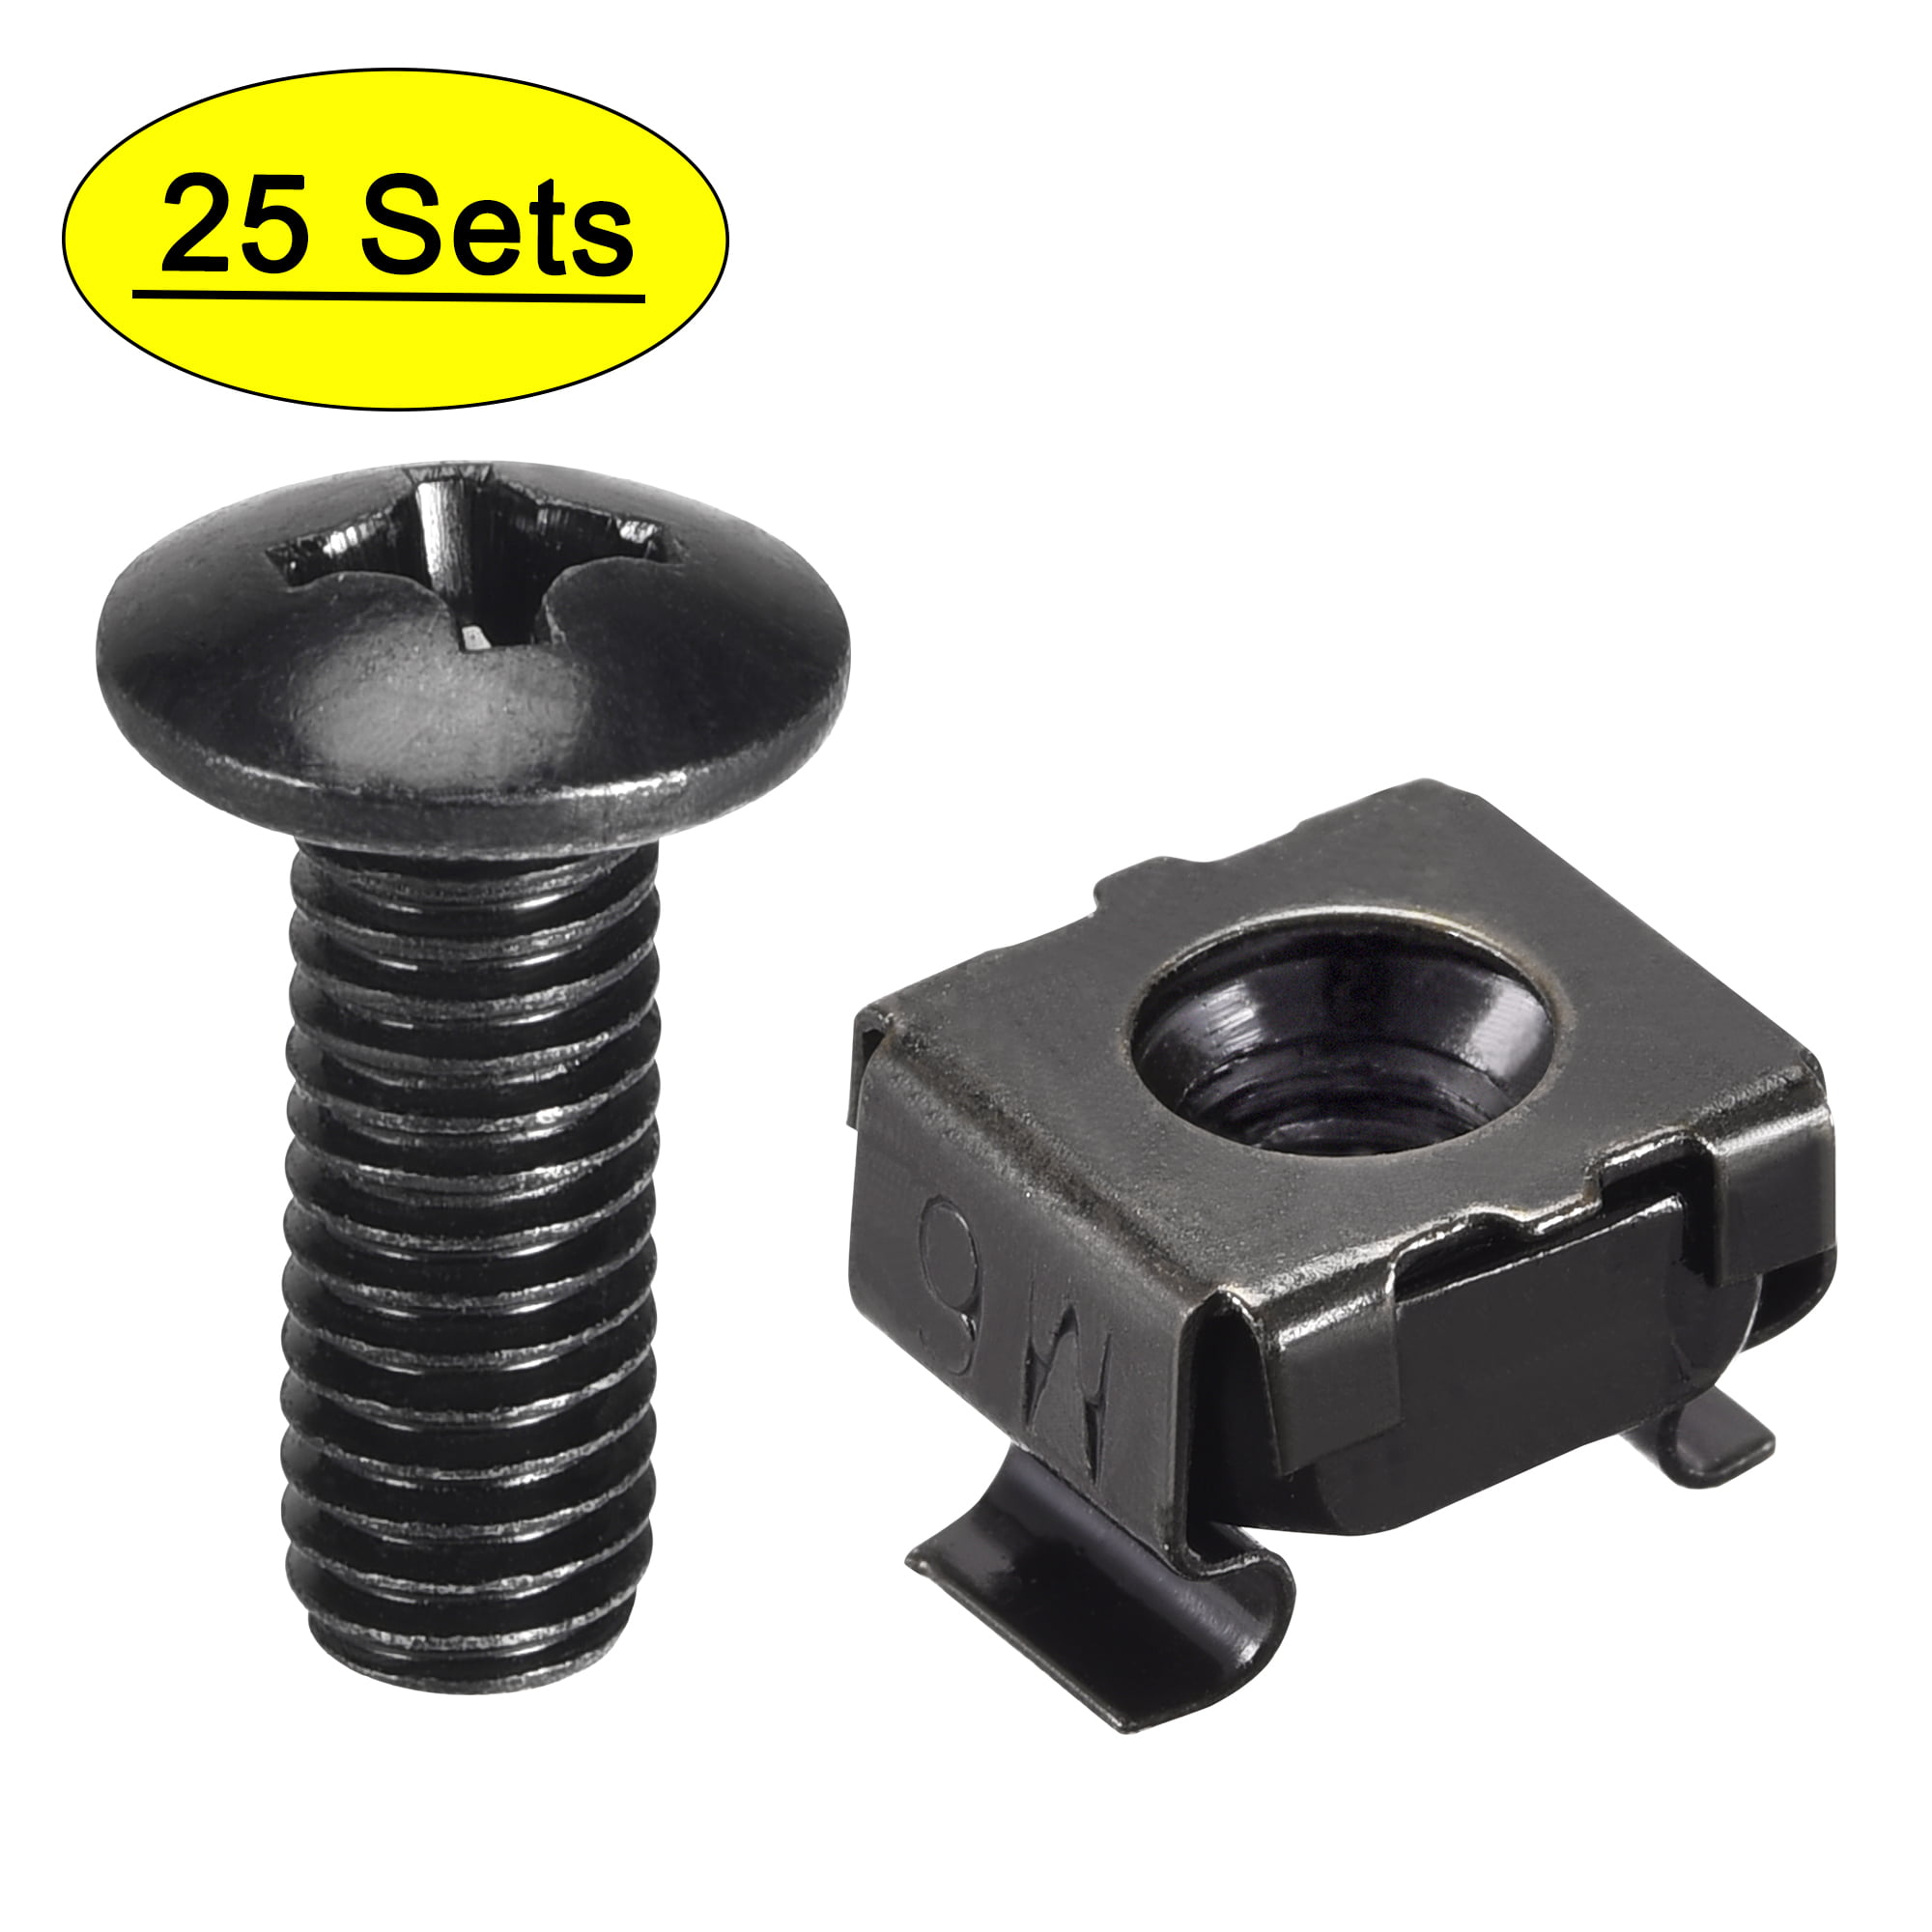 M6 Cage nut Screws and Washer for Server Rack Shelf Cabinet,Server Rack Network and Data Cabinets Mount Fixing Screws 50 Pack M6X10MM